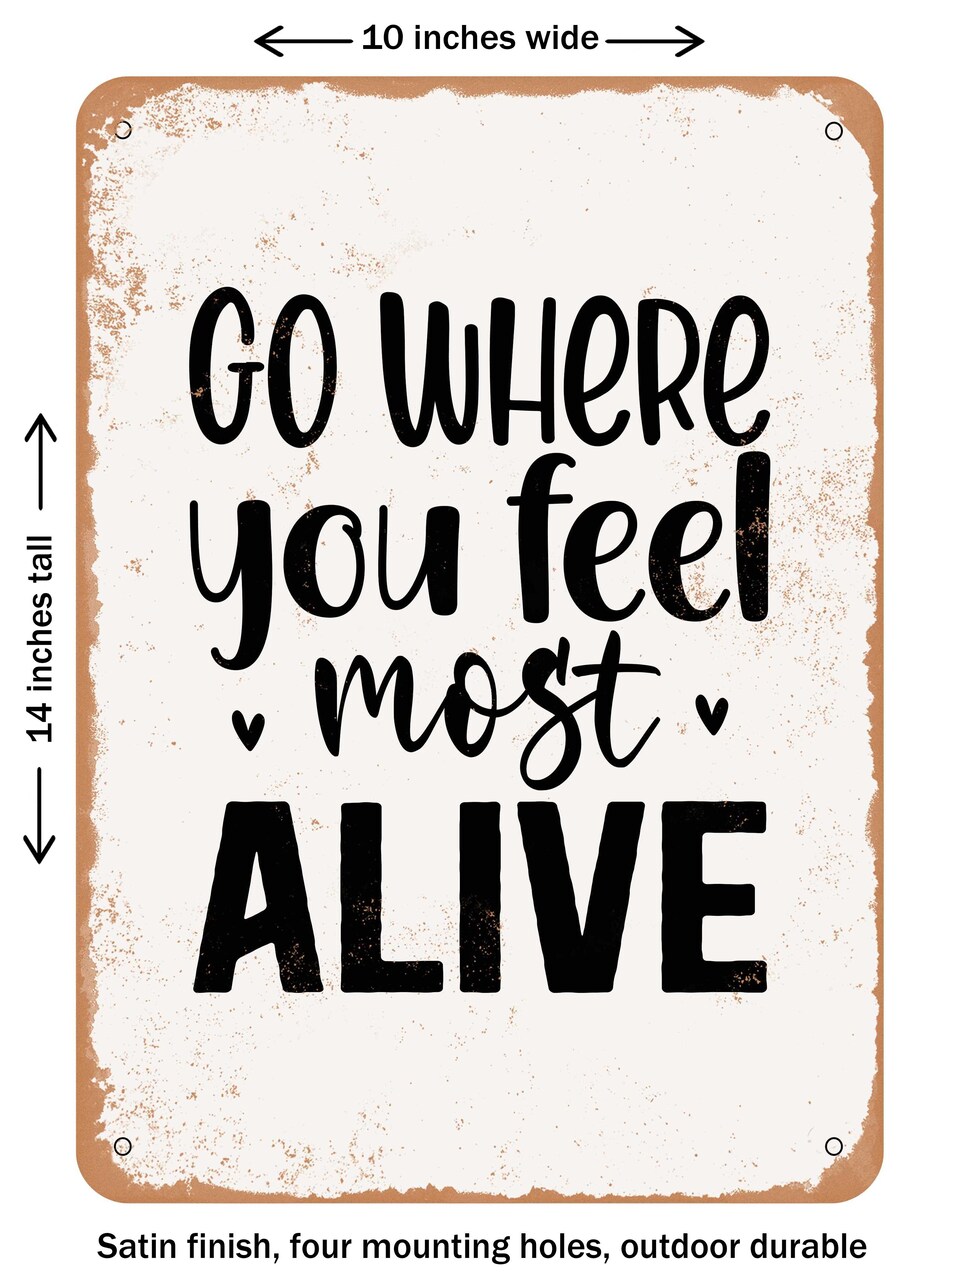 DECORATIVE METAL SIGN - Go Where You Feel Most Alive  - Vintage Rusty Look